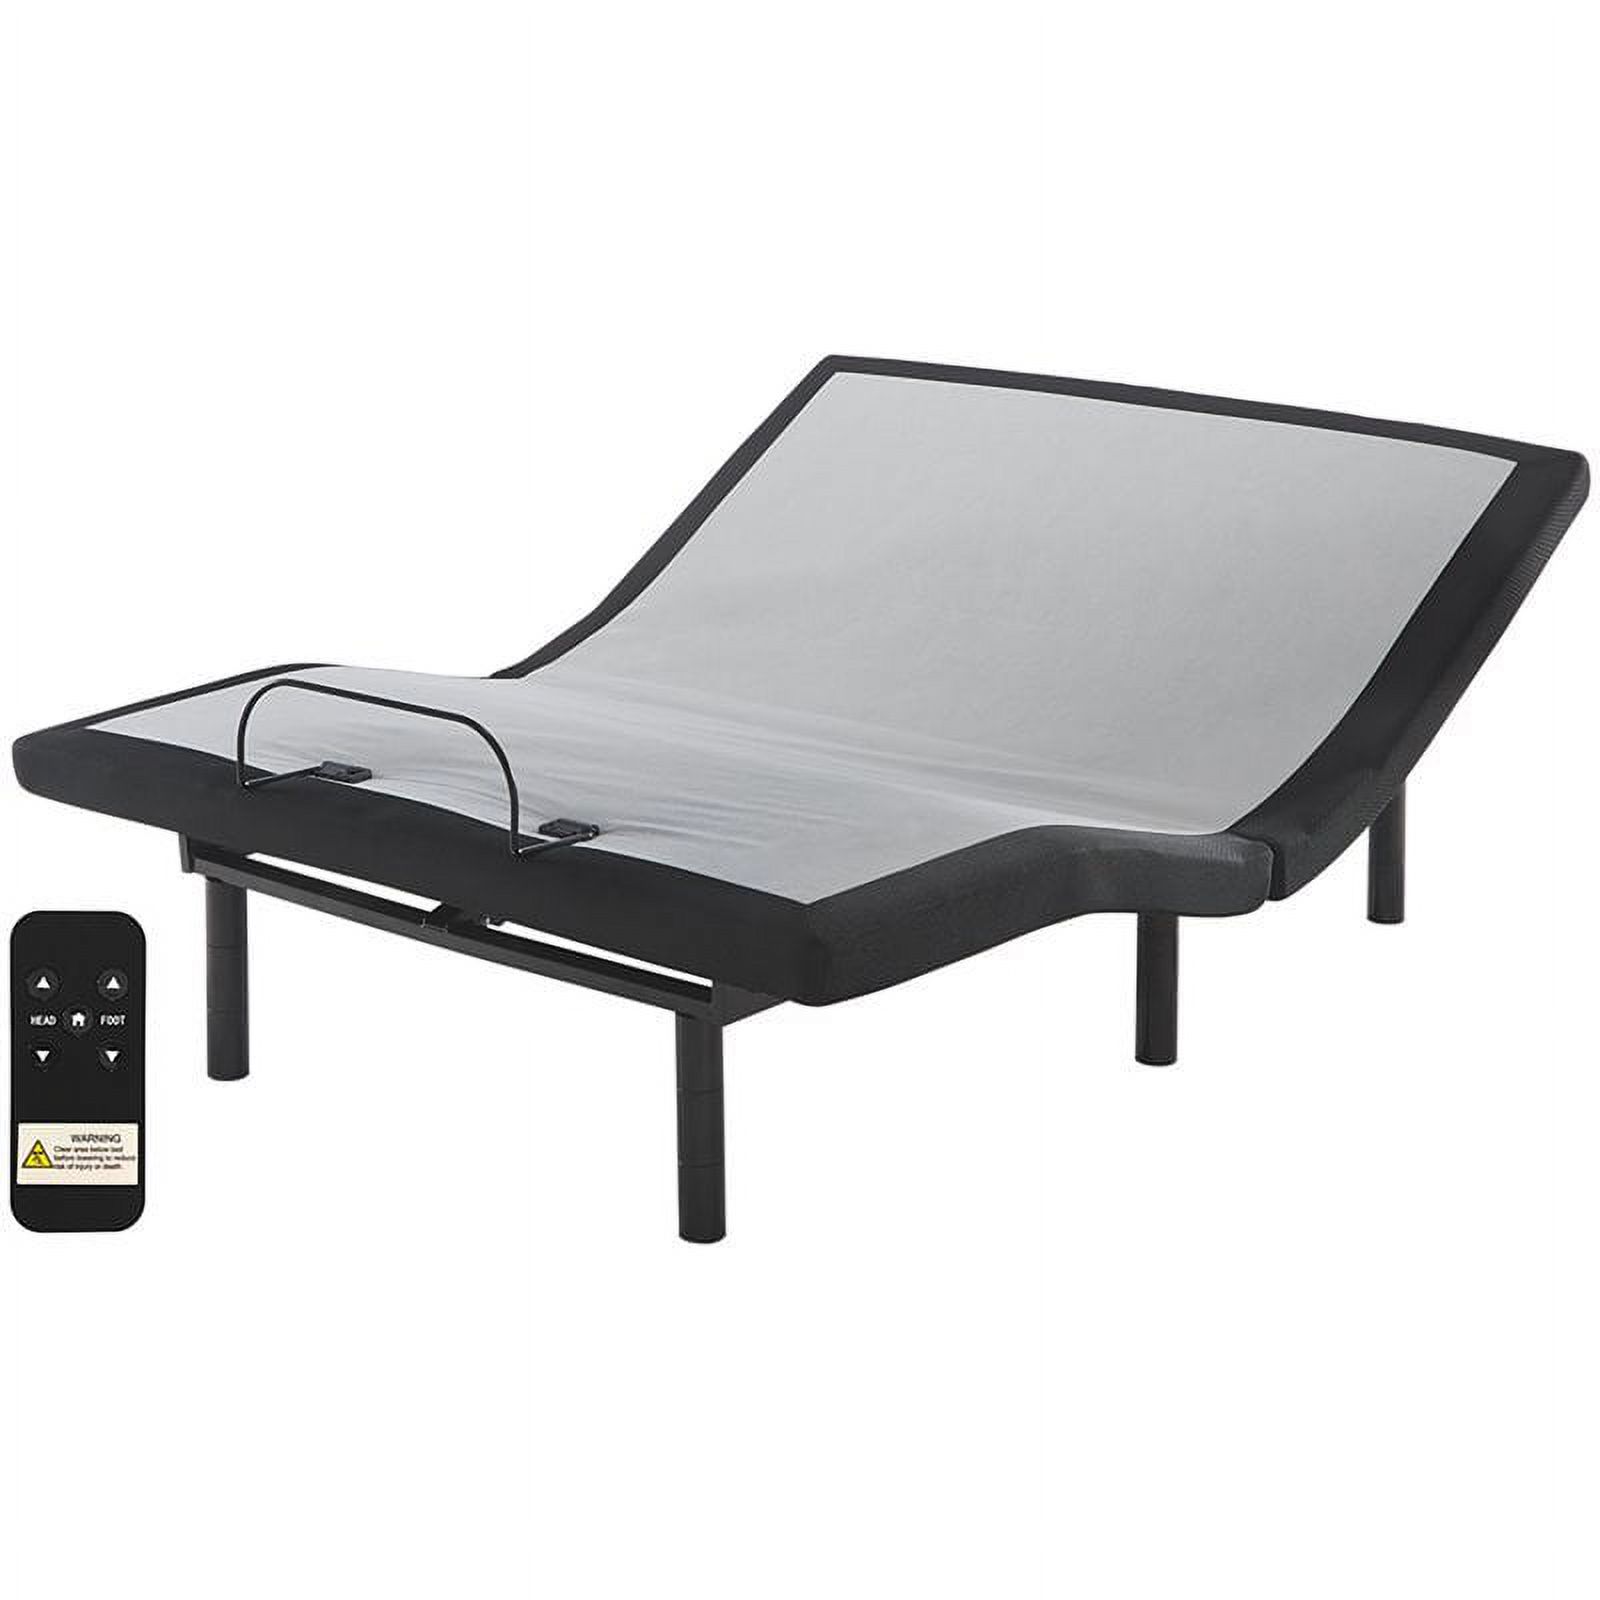 Ashley Furniture Adjustable King  Bed with USB Ports in Black - image 1 of 4